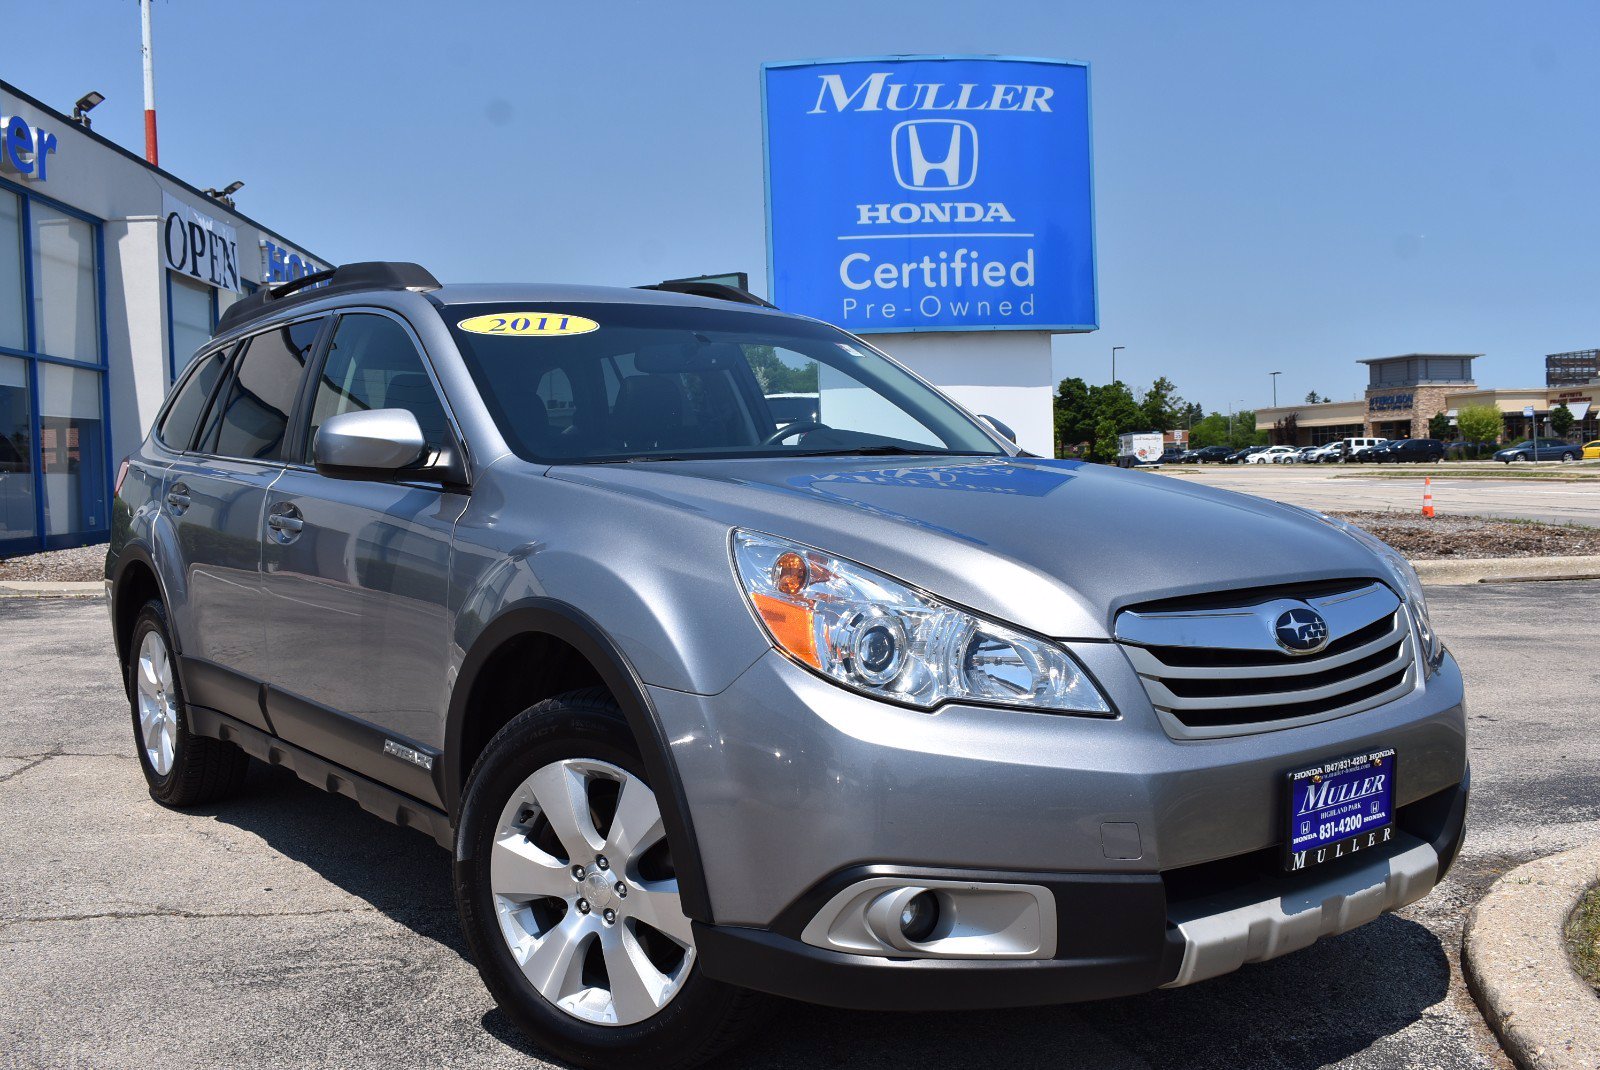 PreOwned 2011 Subaru Outback 3.6R Limited Pwr Moon/Nav